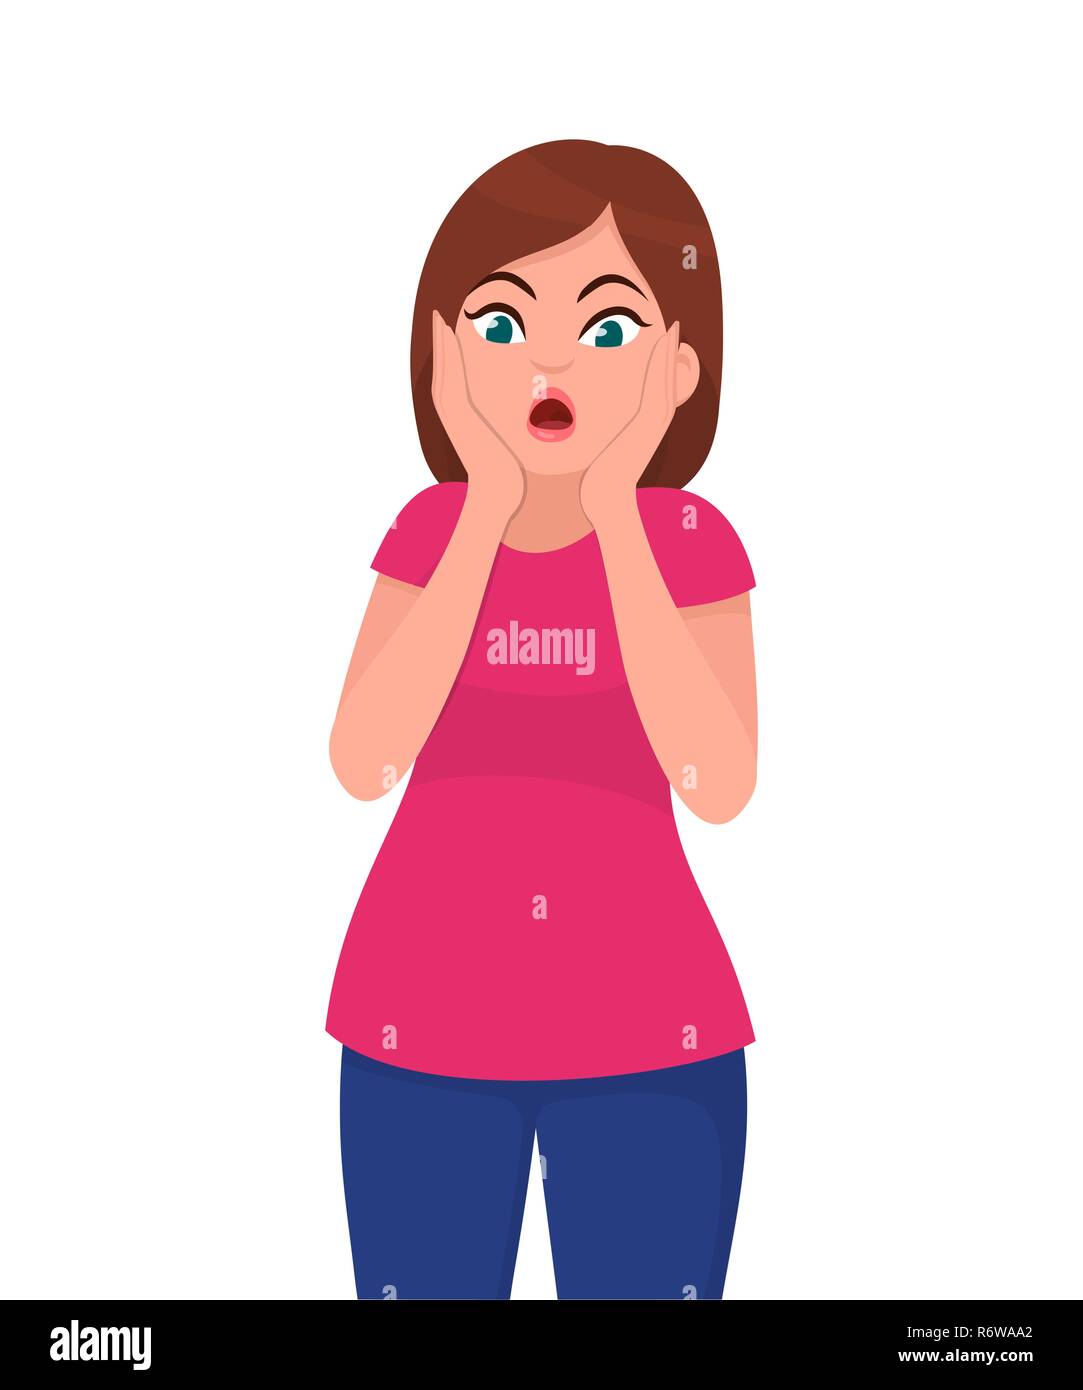 Shocked pretty young woman holding hands on face. Human emotion and body language concept illustration in vector cartoon flat style. Stock Vector